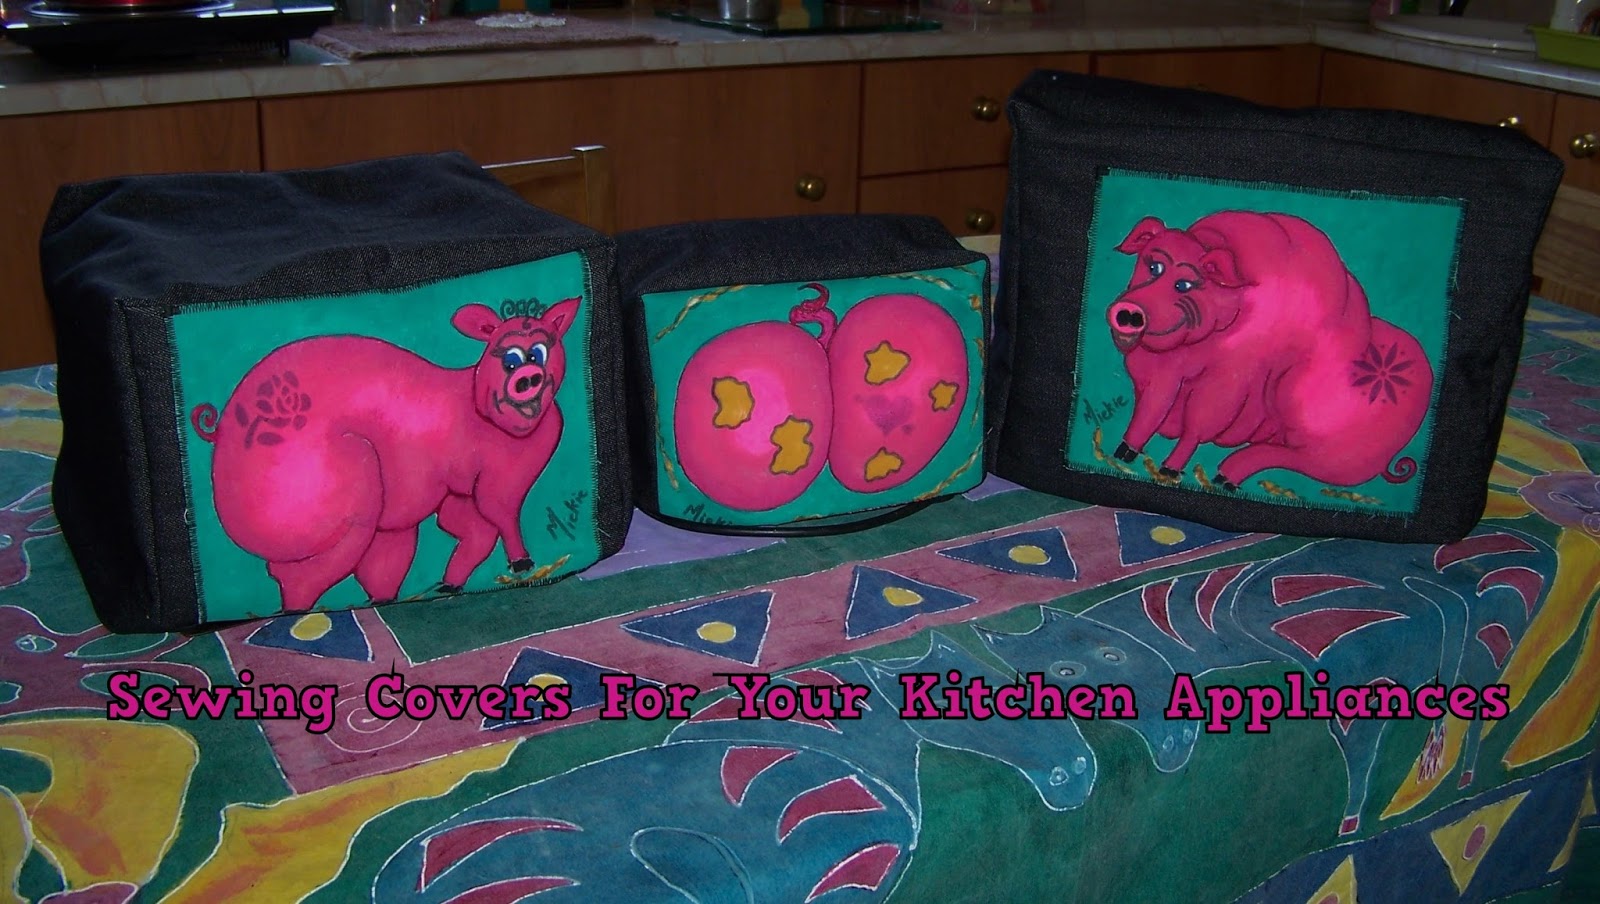 APPLIANCE COVERS - Spruce up Your Kitchen